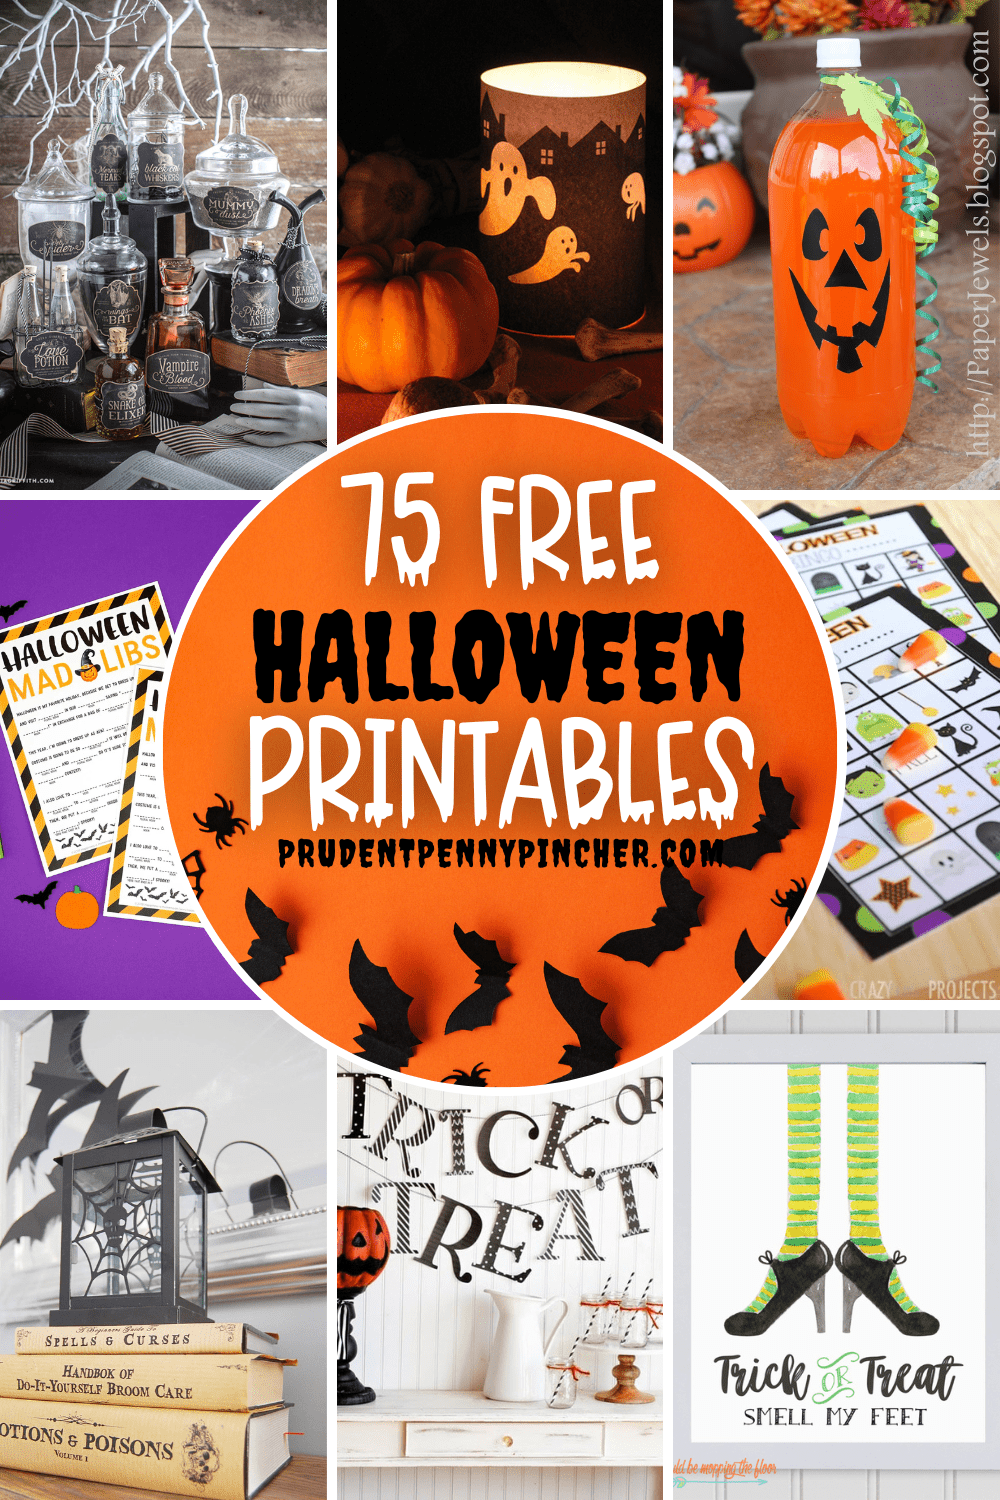 Free Printable Halloween Banner - Prudent Penny Pincher